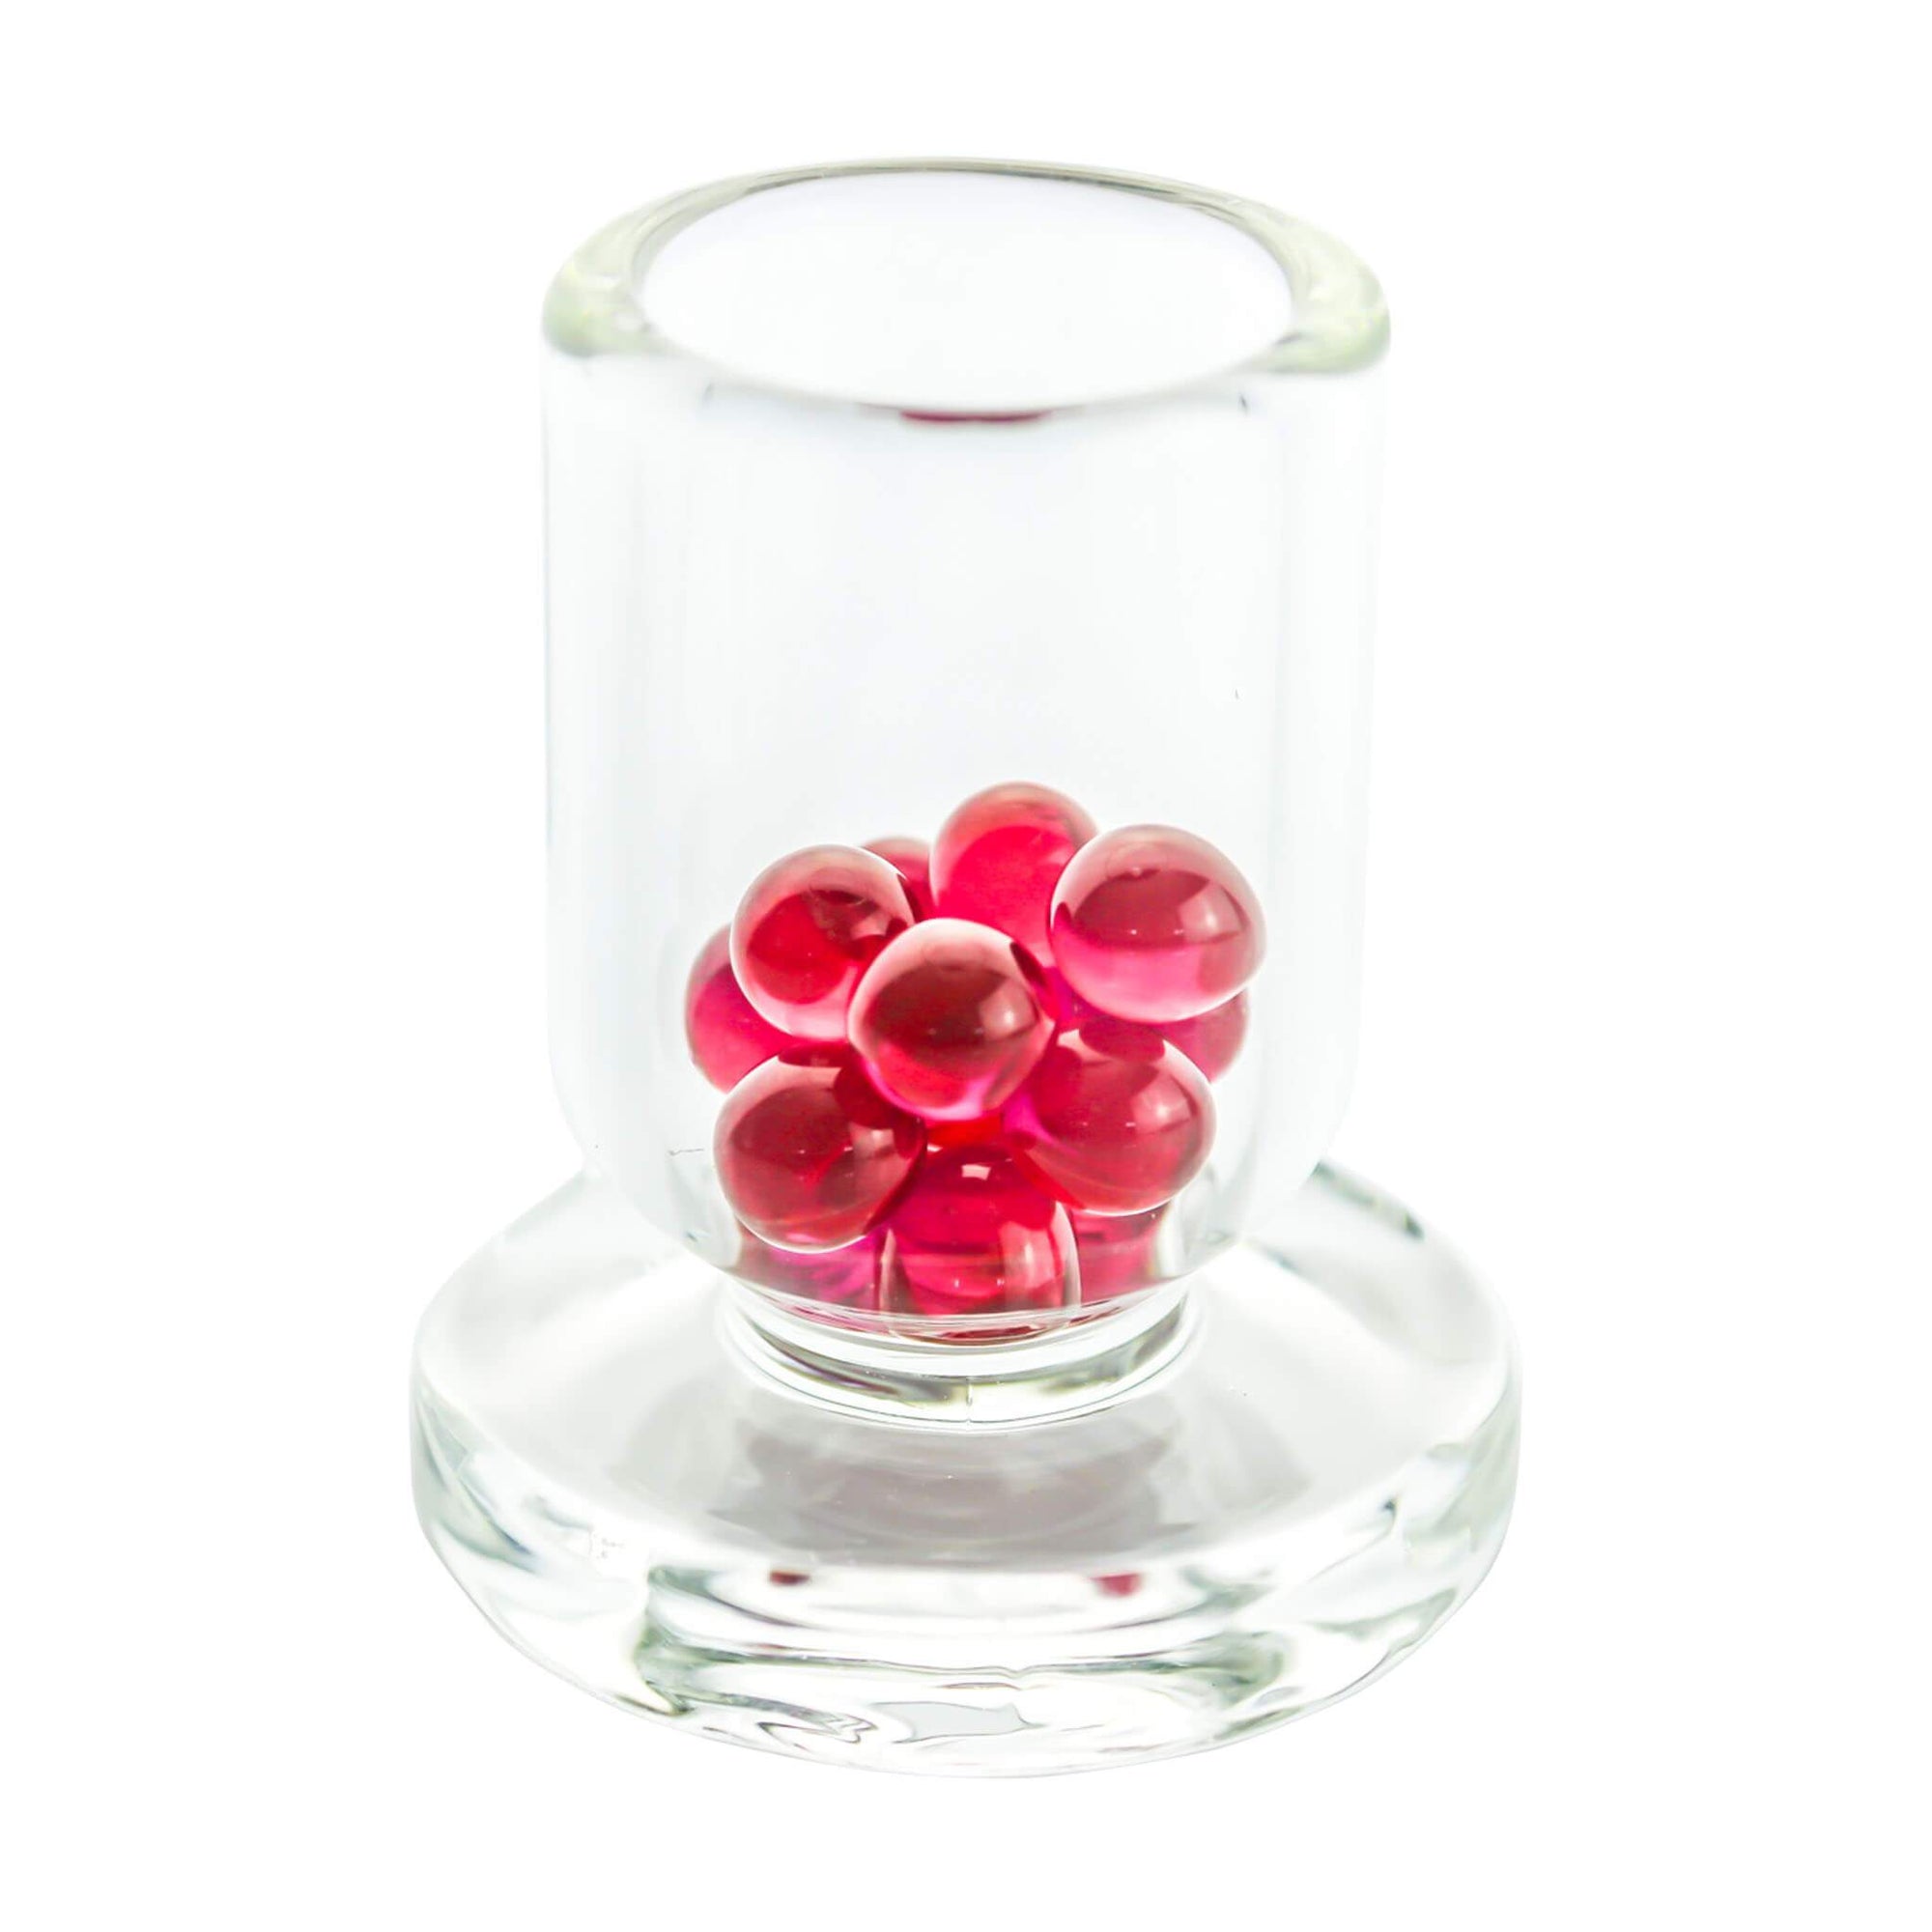 6mm Terp (Dab) Pearls-Ruby | Dab Pearls In Cup | the dabbing specialists